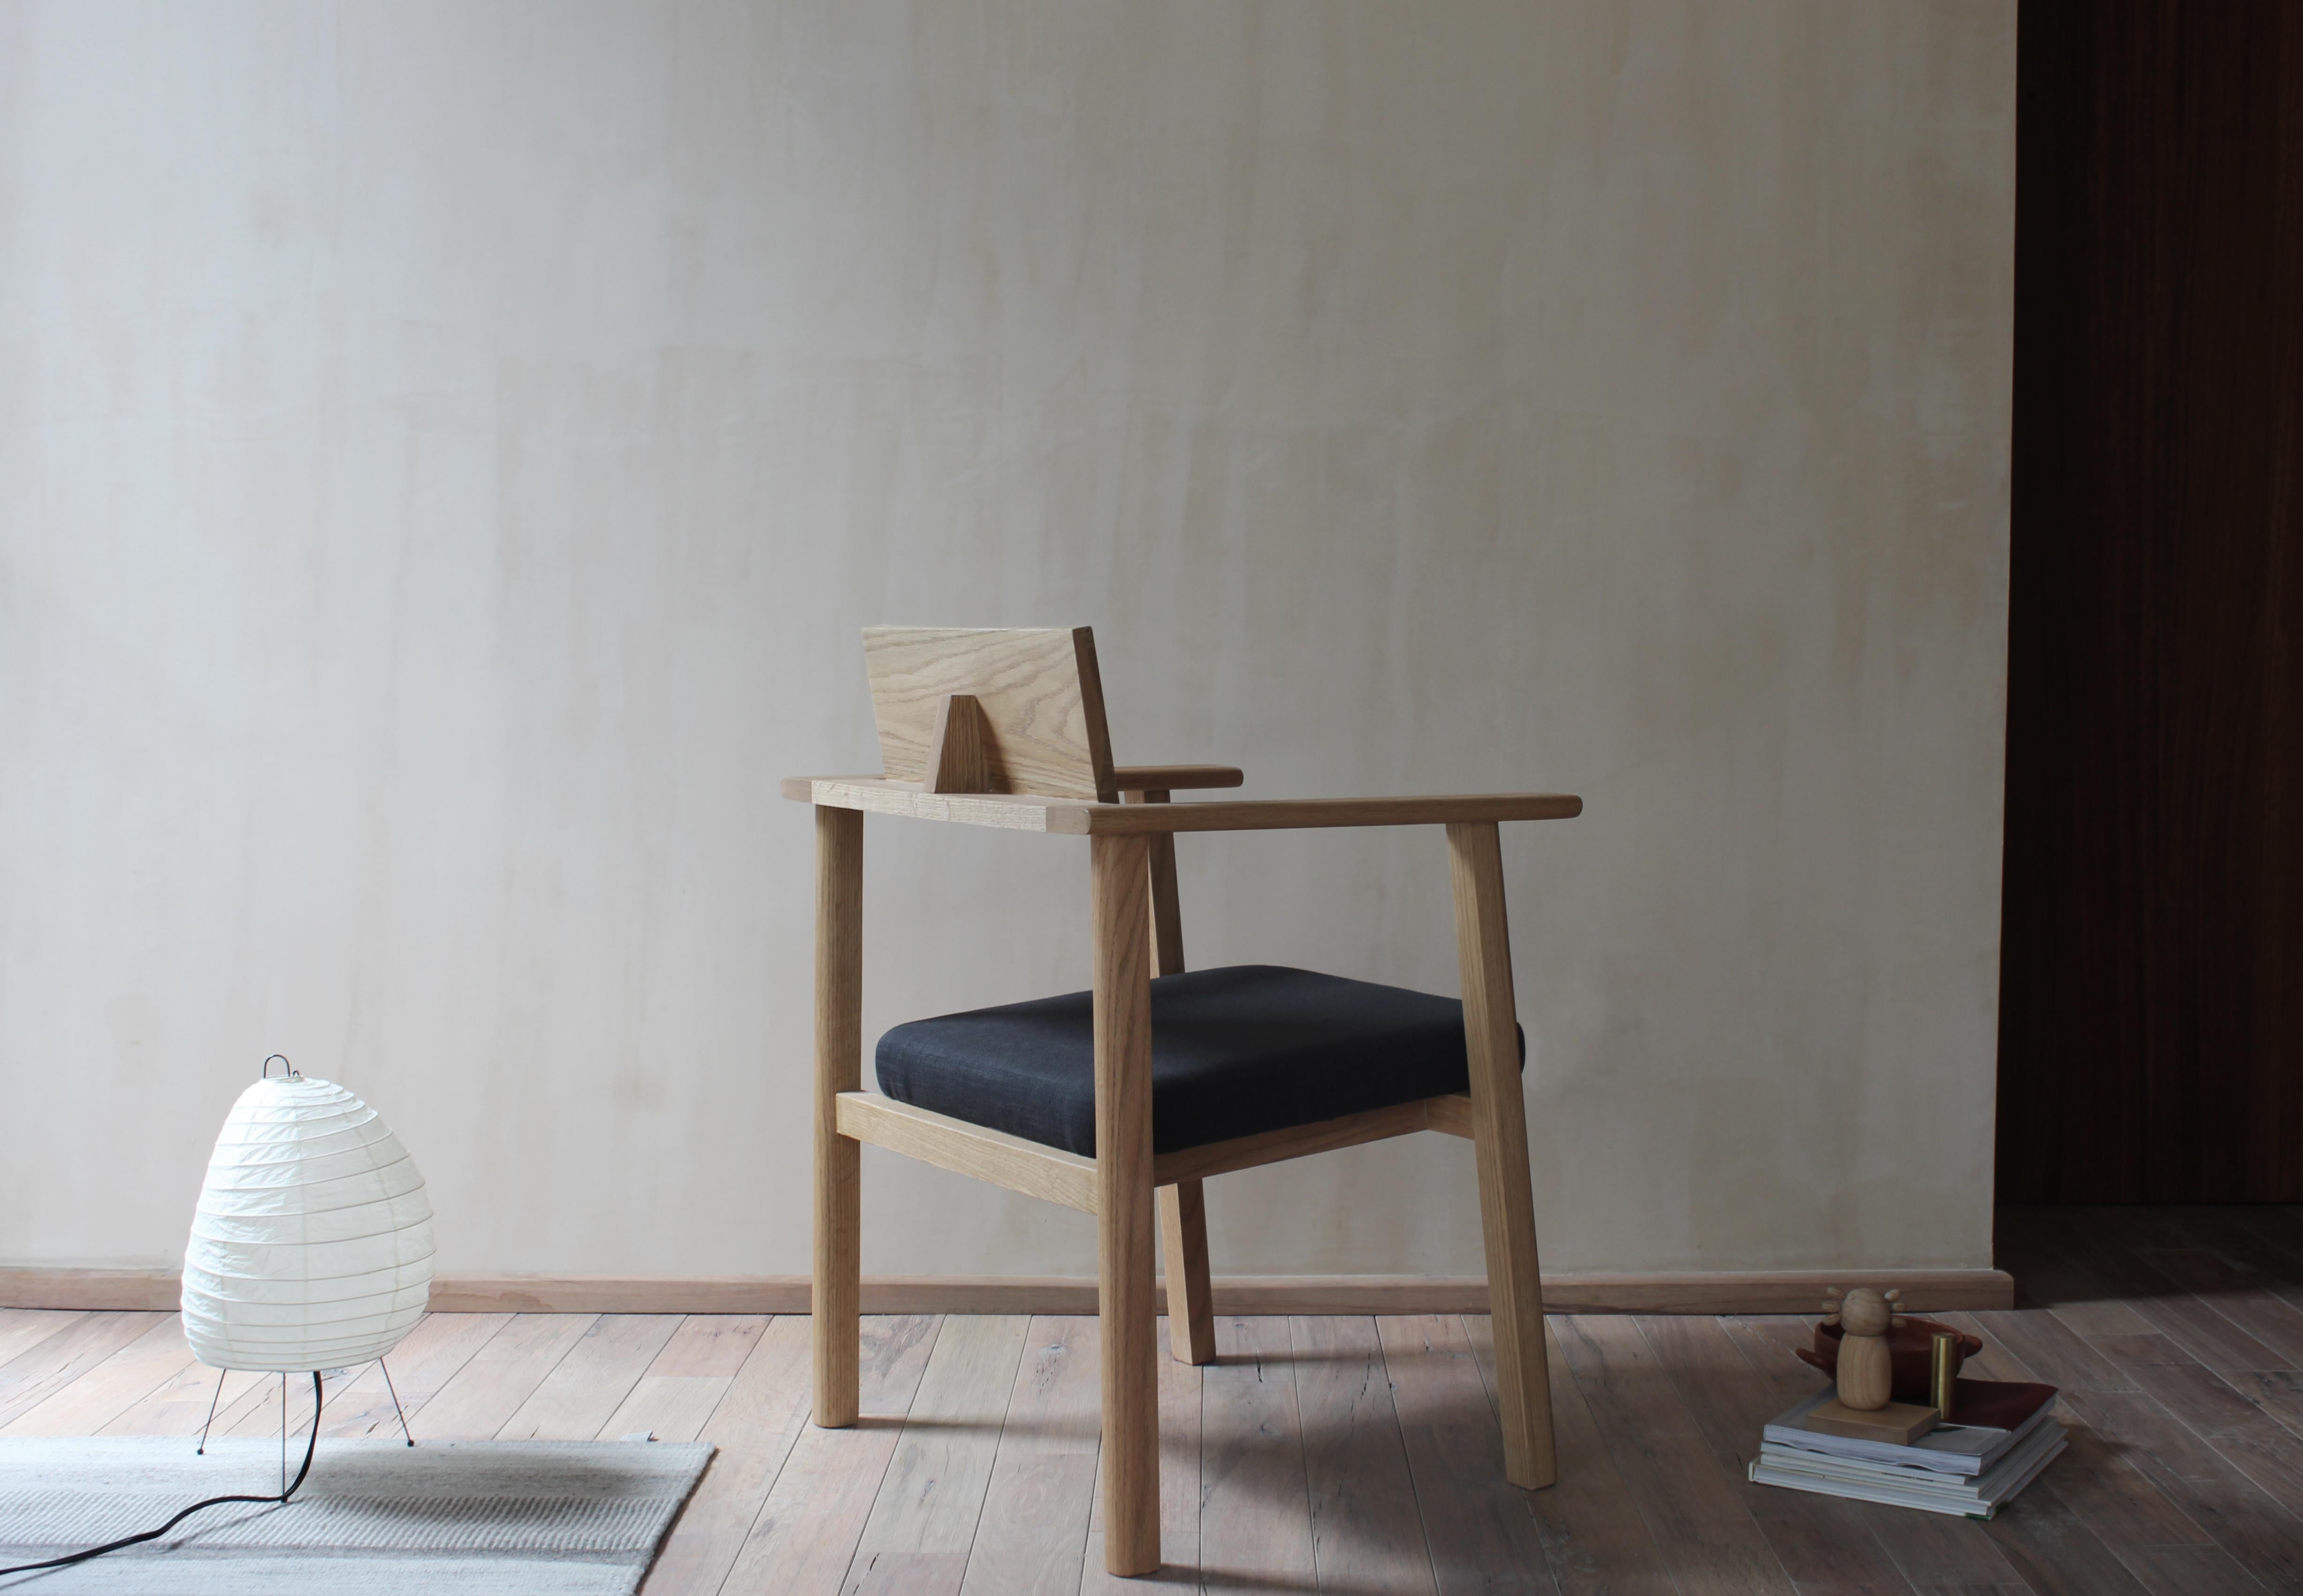 Torso is minimal chair inspired by the straight and geometries of human body movements. Torso is made completely with solid oak and blackened finish with special techniques and handcrafted by woodworkers inspired in Japanese joineries and aesthetic